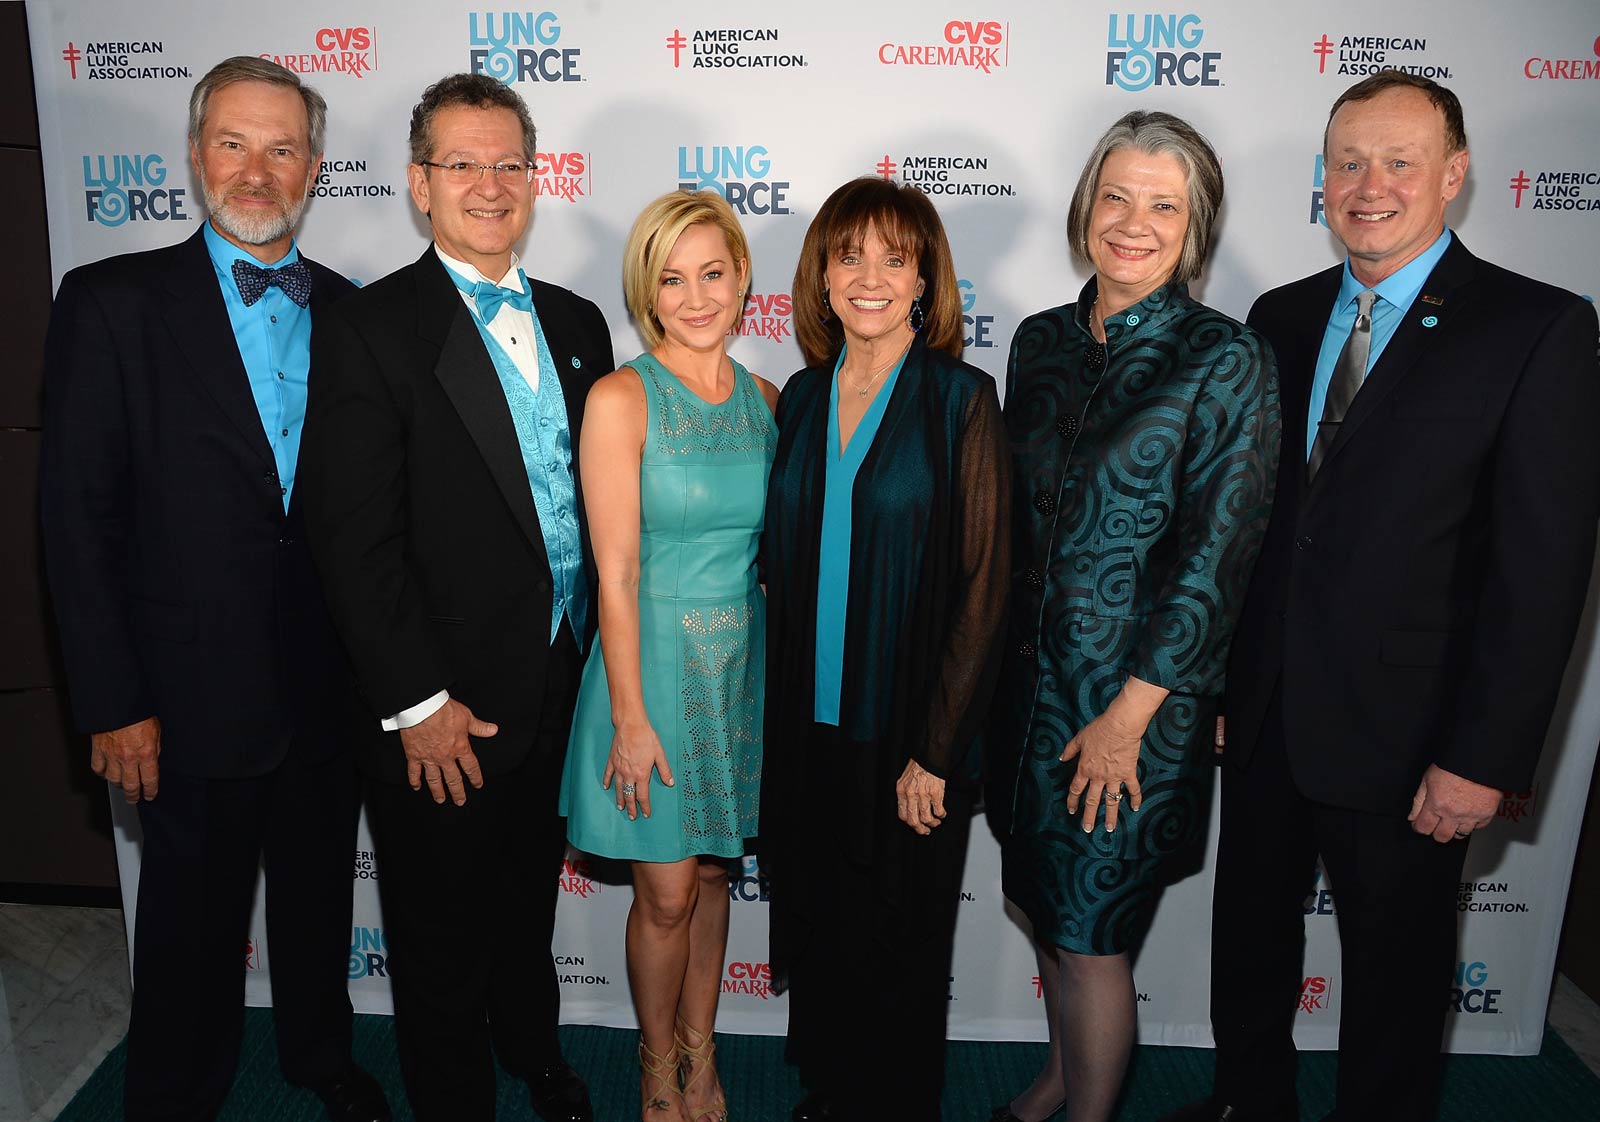 Kellie Pickler attends American Lung Association’s LUNG FORCE gala